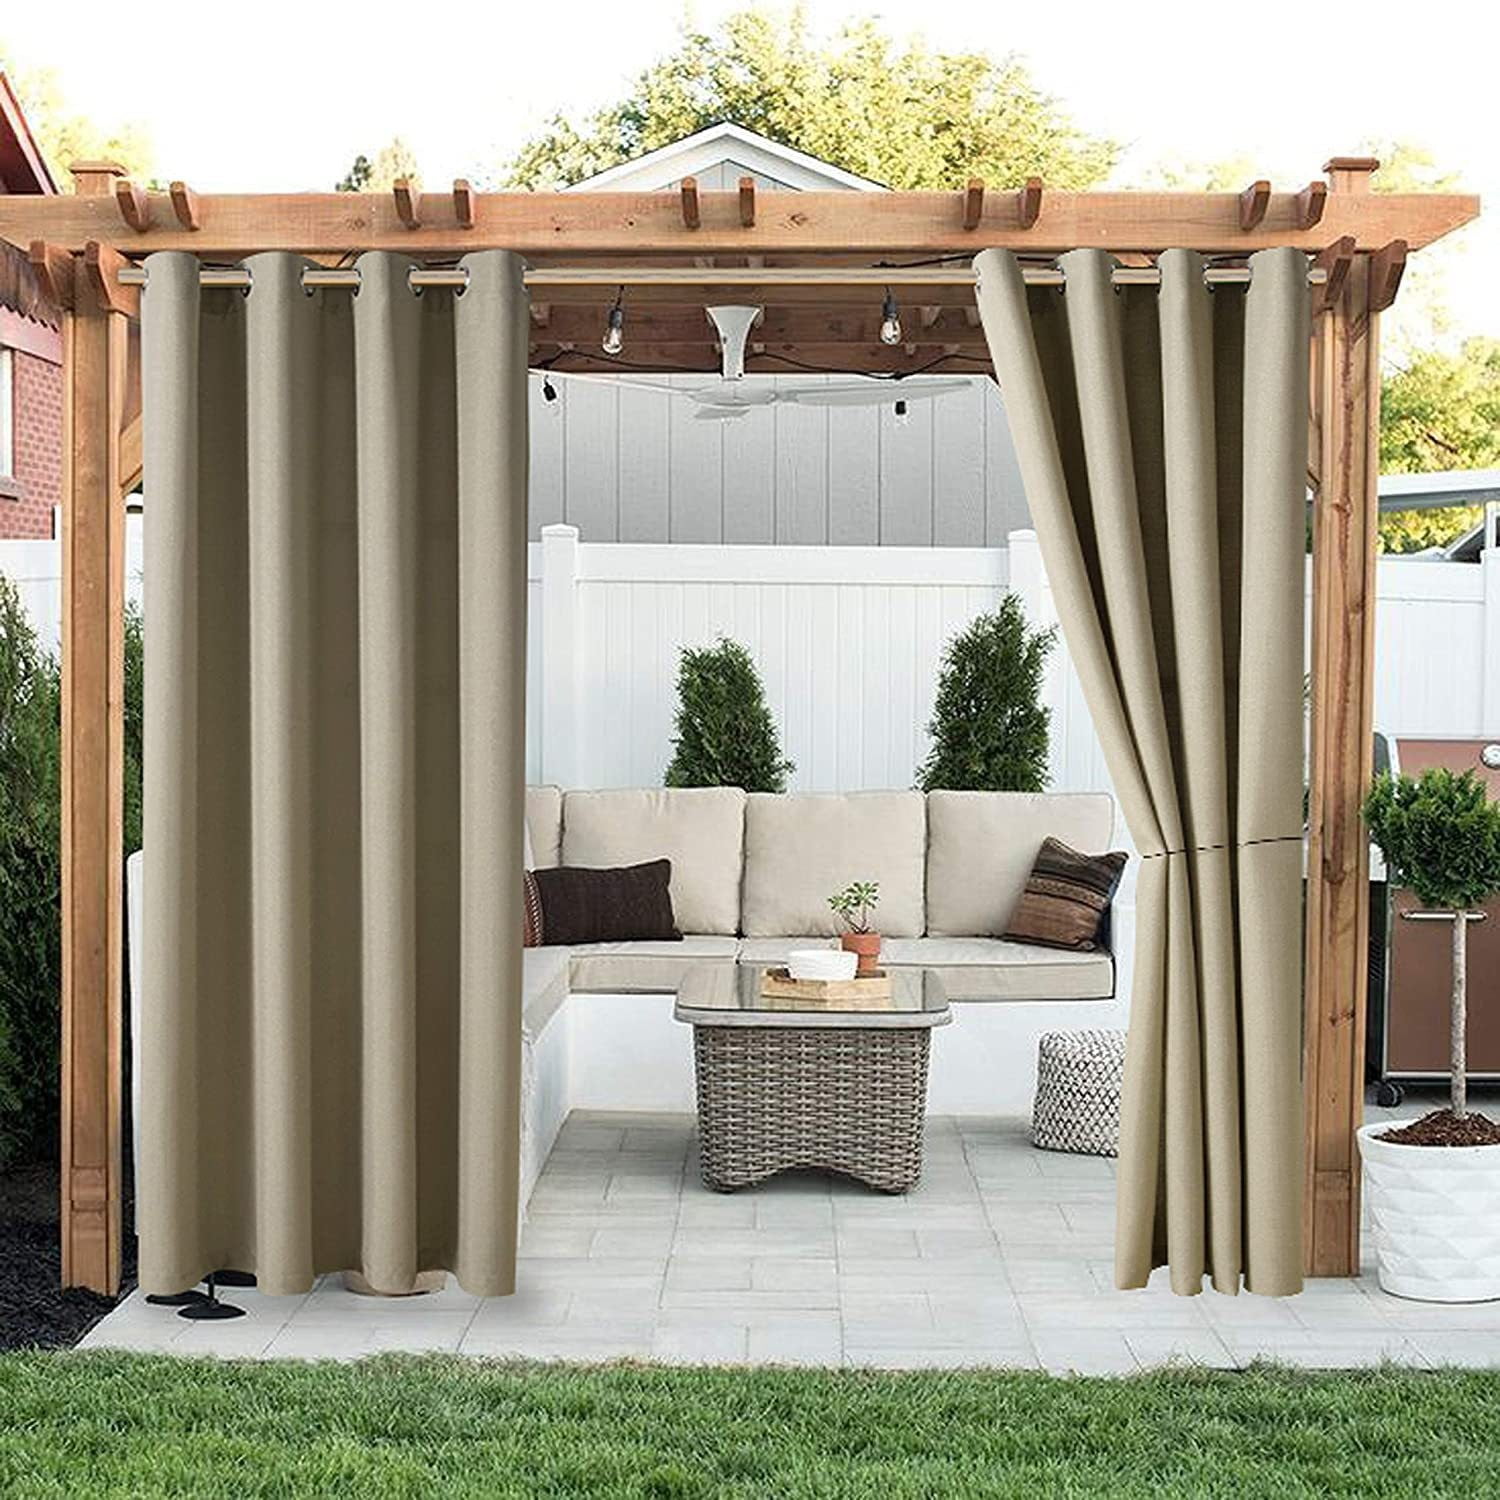 Details about   Outdoor Garden Waterproof Curtain Blackout Eyelets Thermal Curtain Pergola Patio 